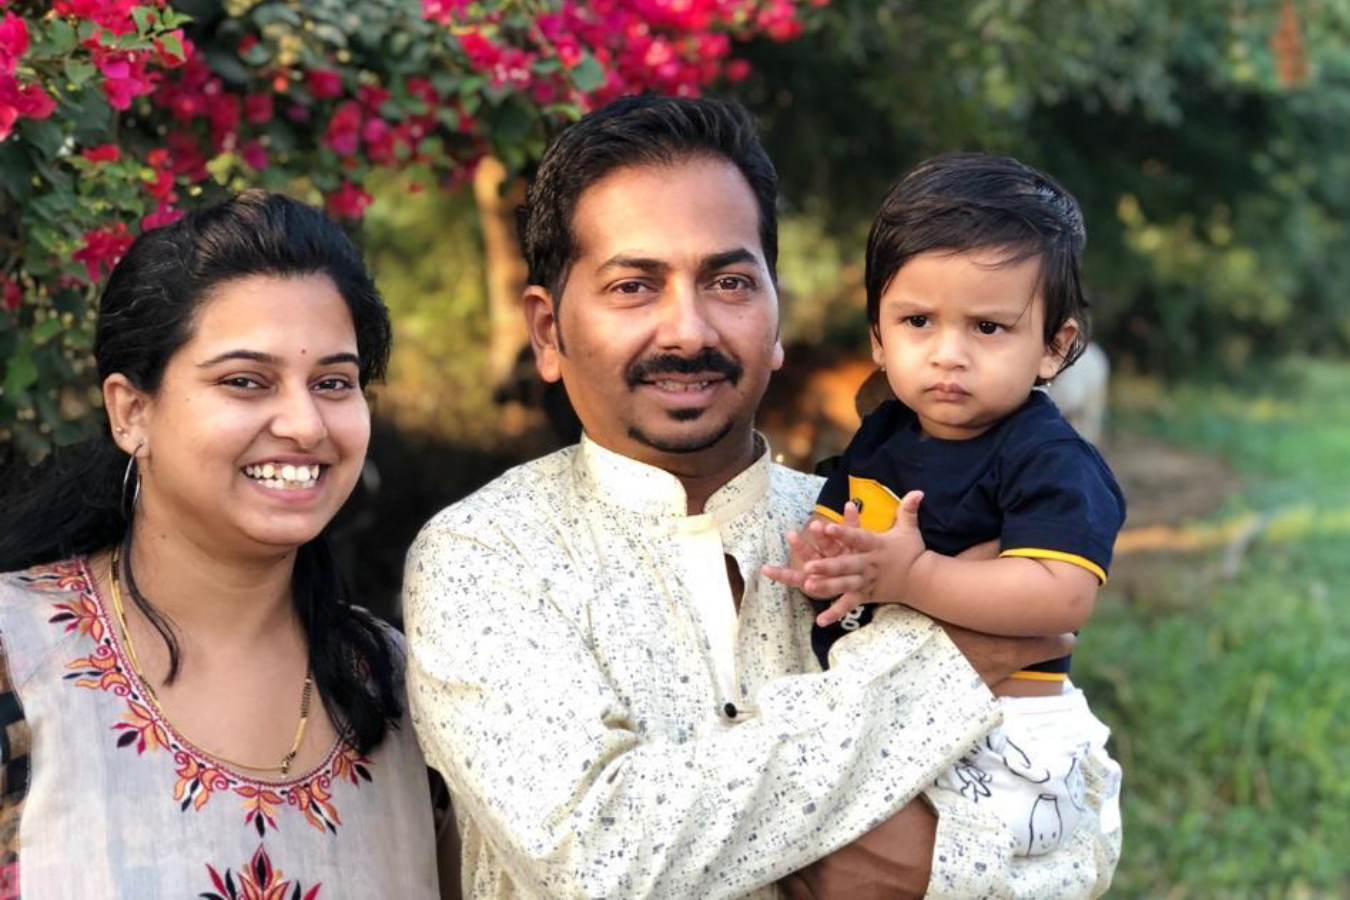 Client Anagha & Kshitij with their Child